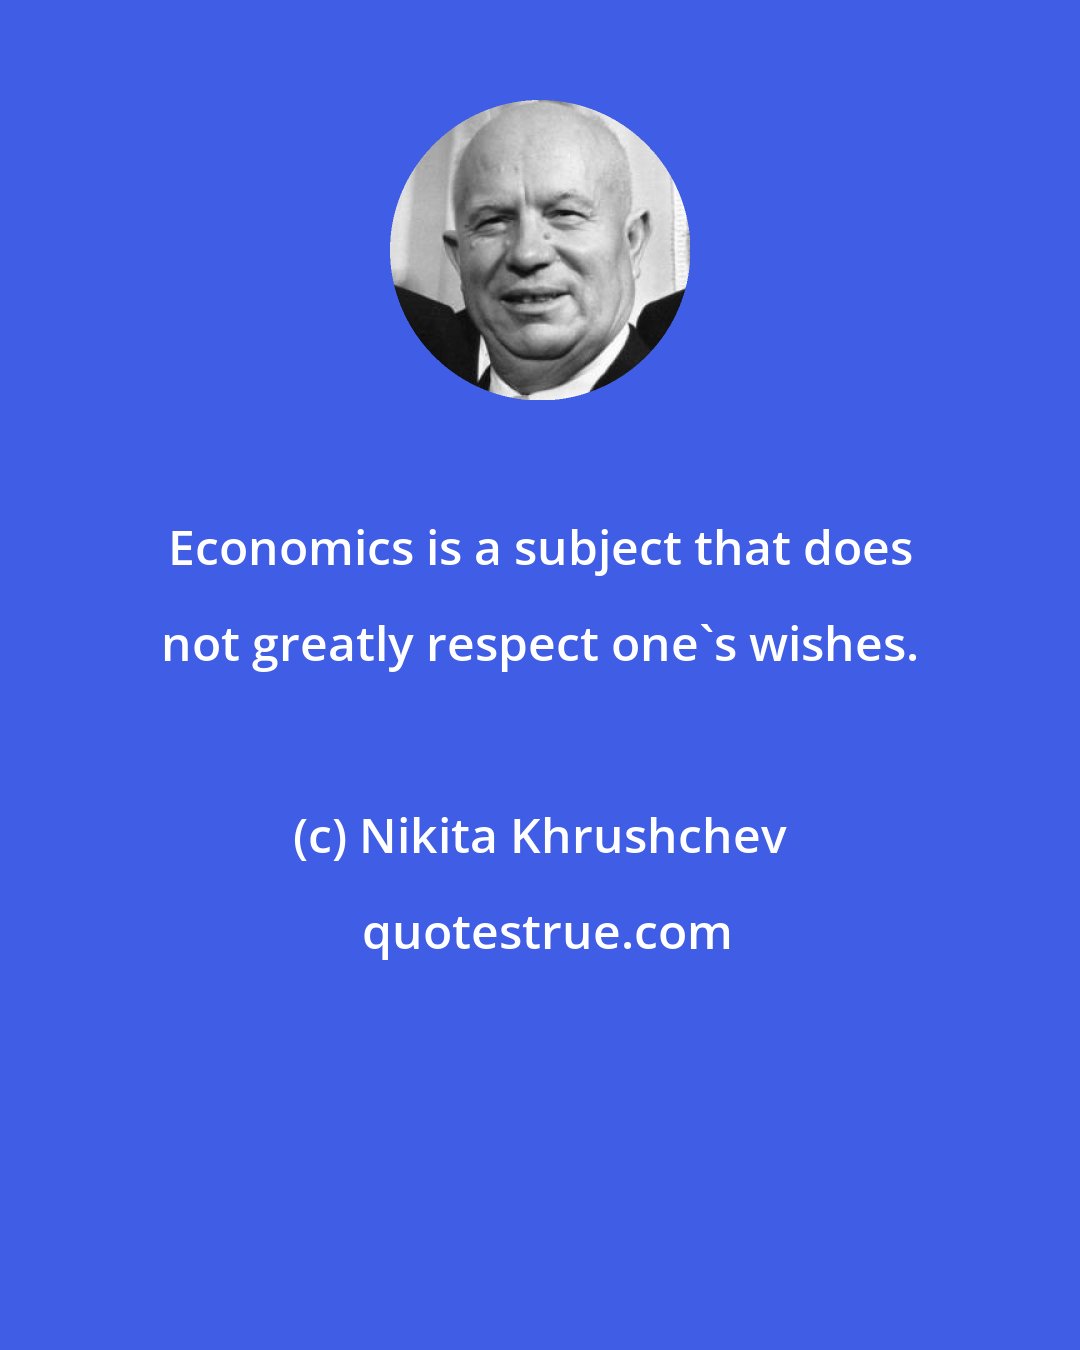 Nikita Khrushchev: Economics is a subject that does not greatly respect one's wishes.